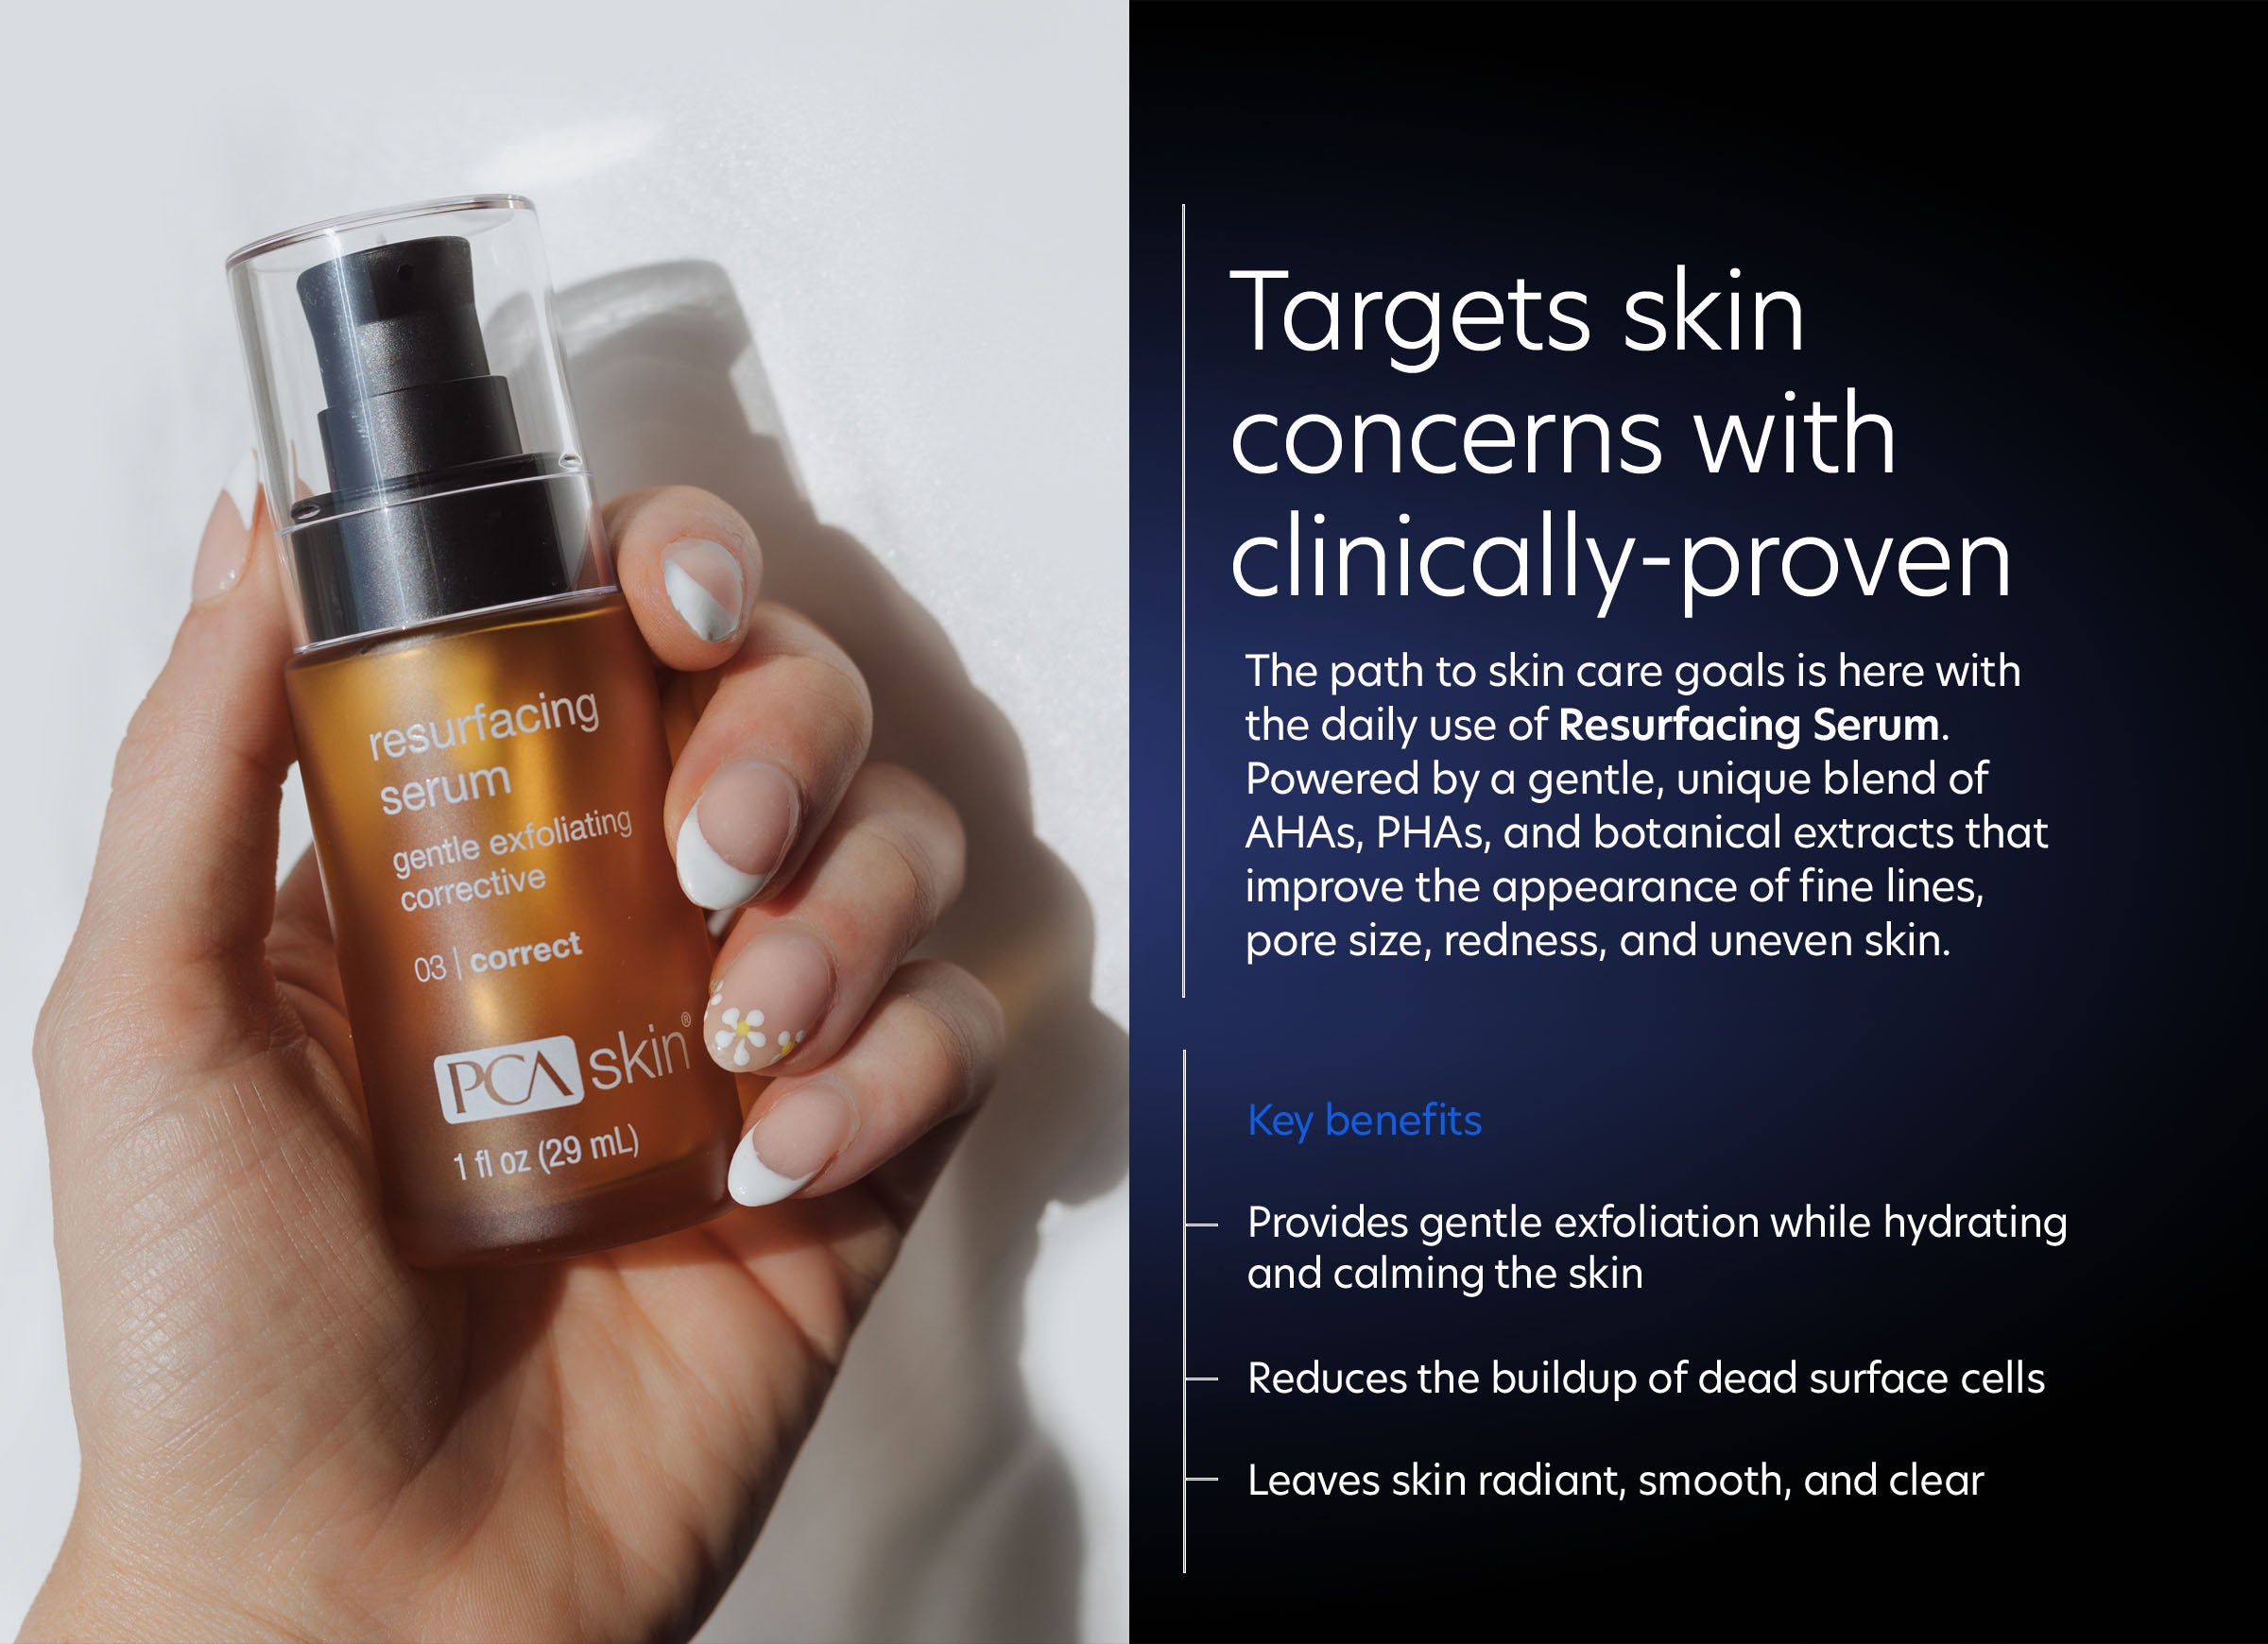 Resurfacing Serum - Targets skin concerns with clinically-proven